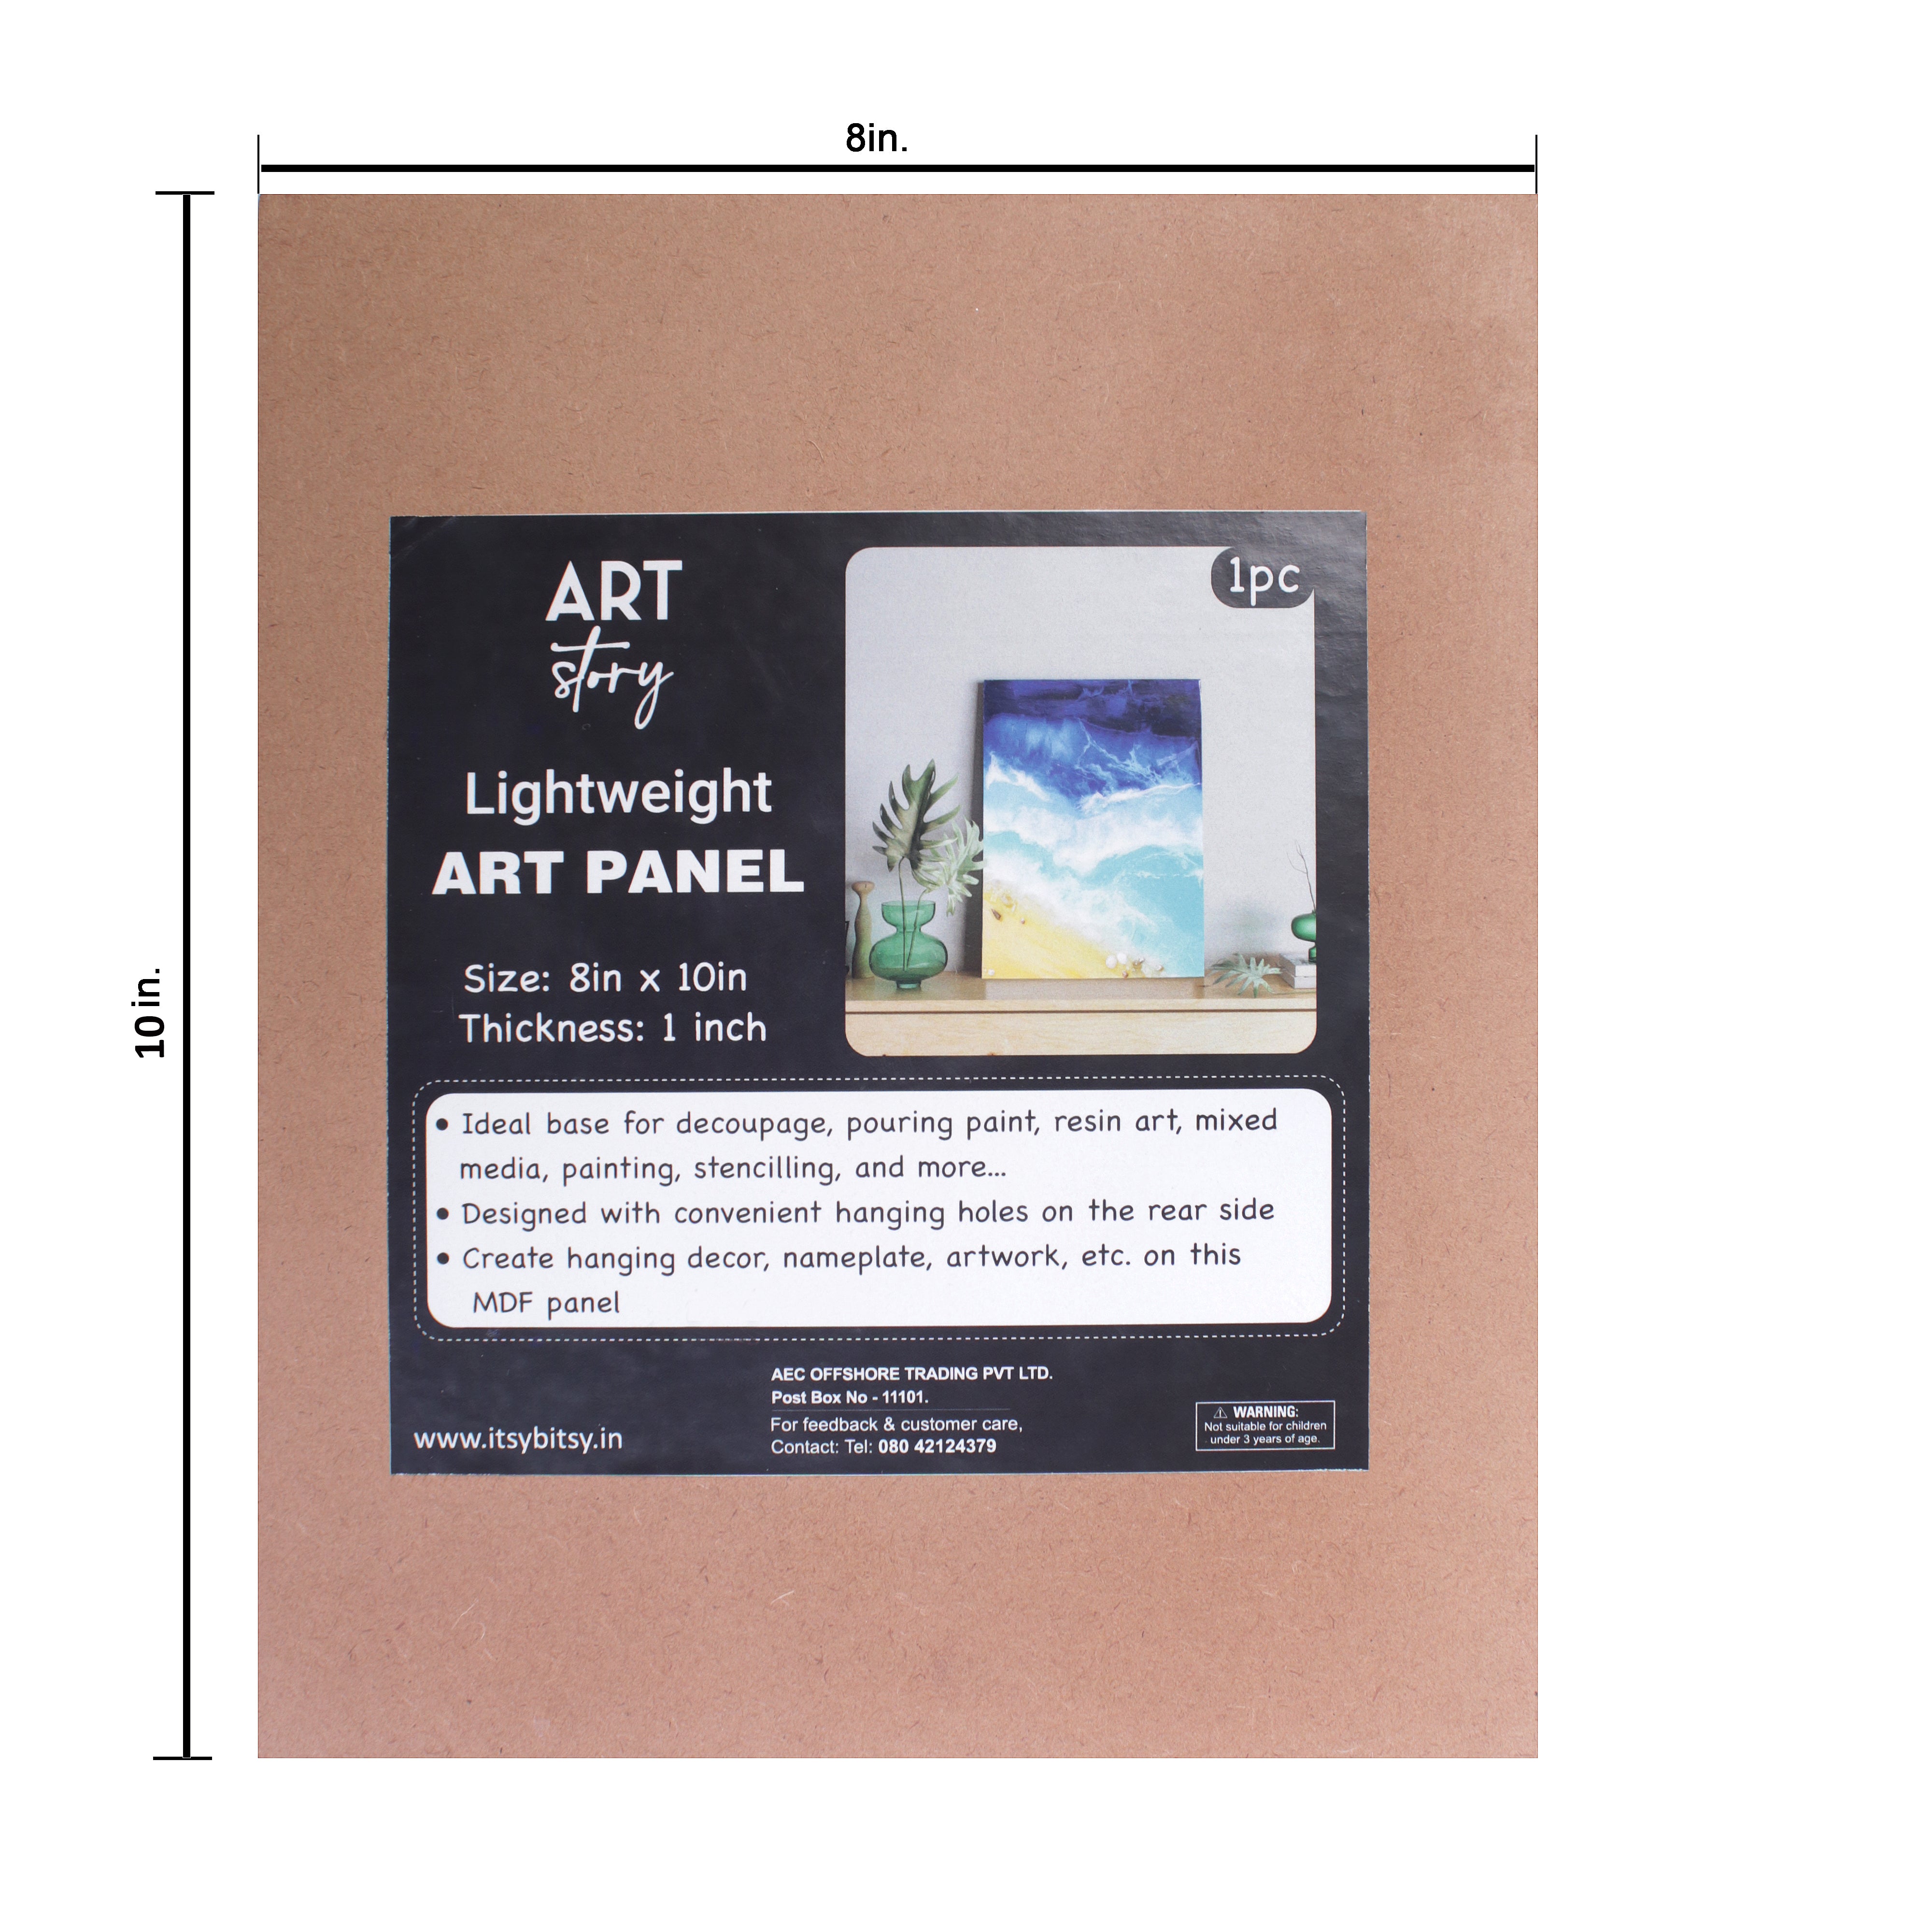 Mdf Light Weight Art Panel 8 X 10 X 1Inch 5.5Mm Thick 1Pc Sw Lb